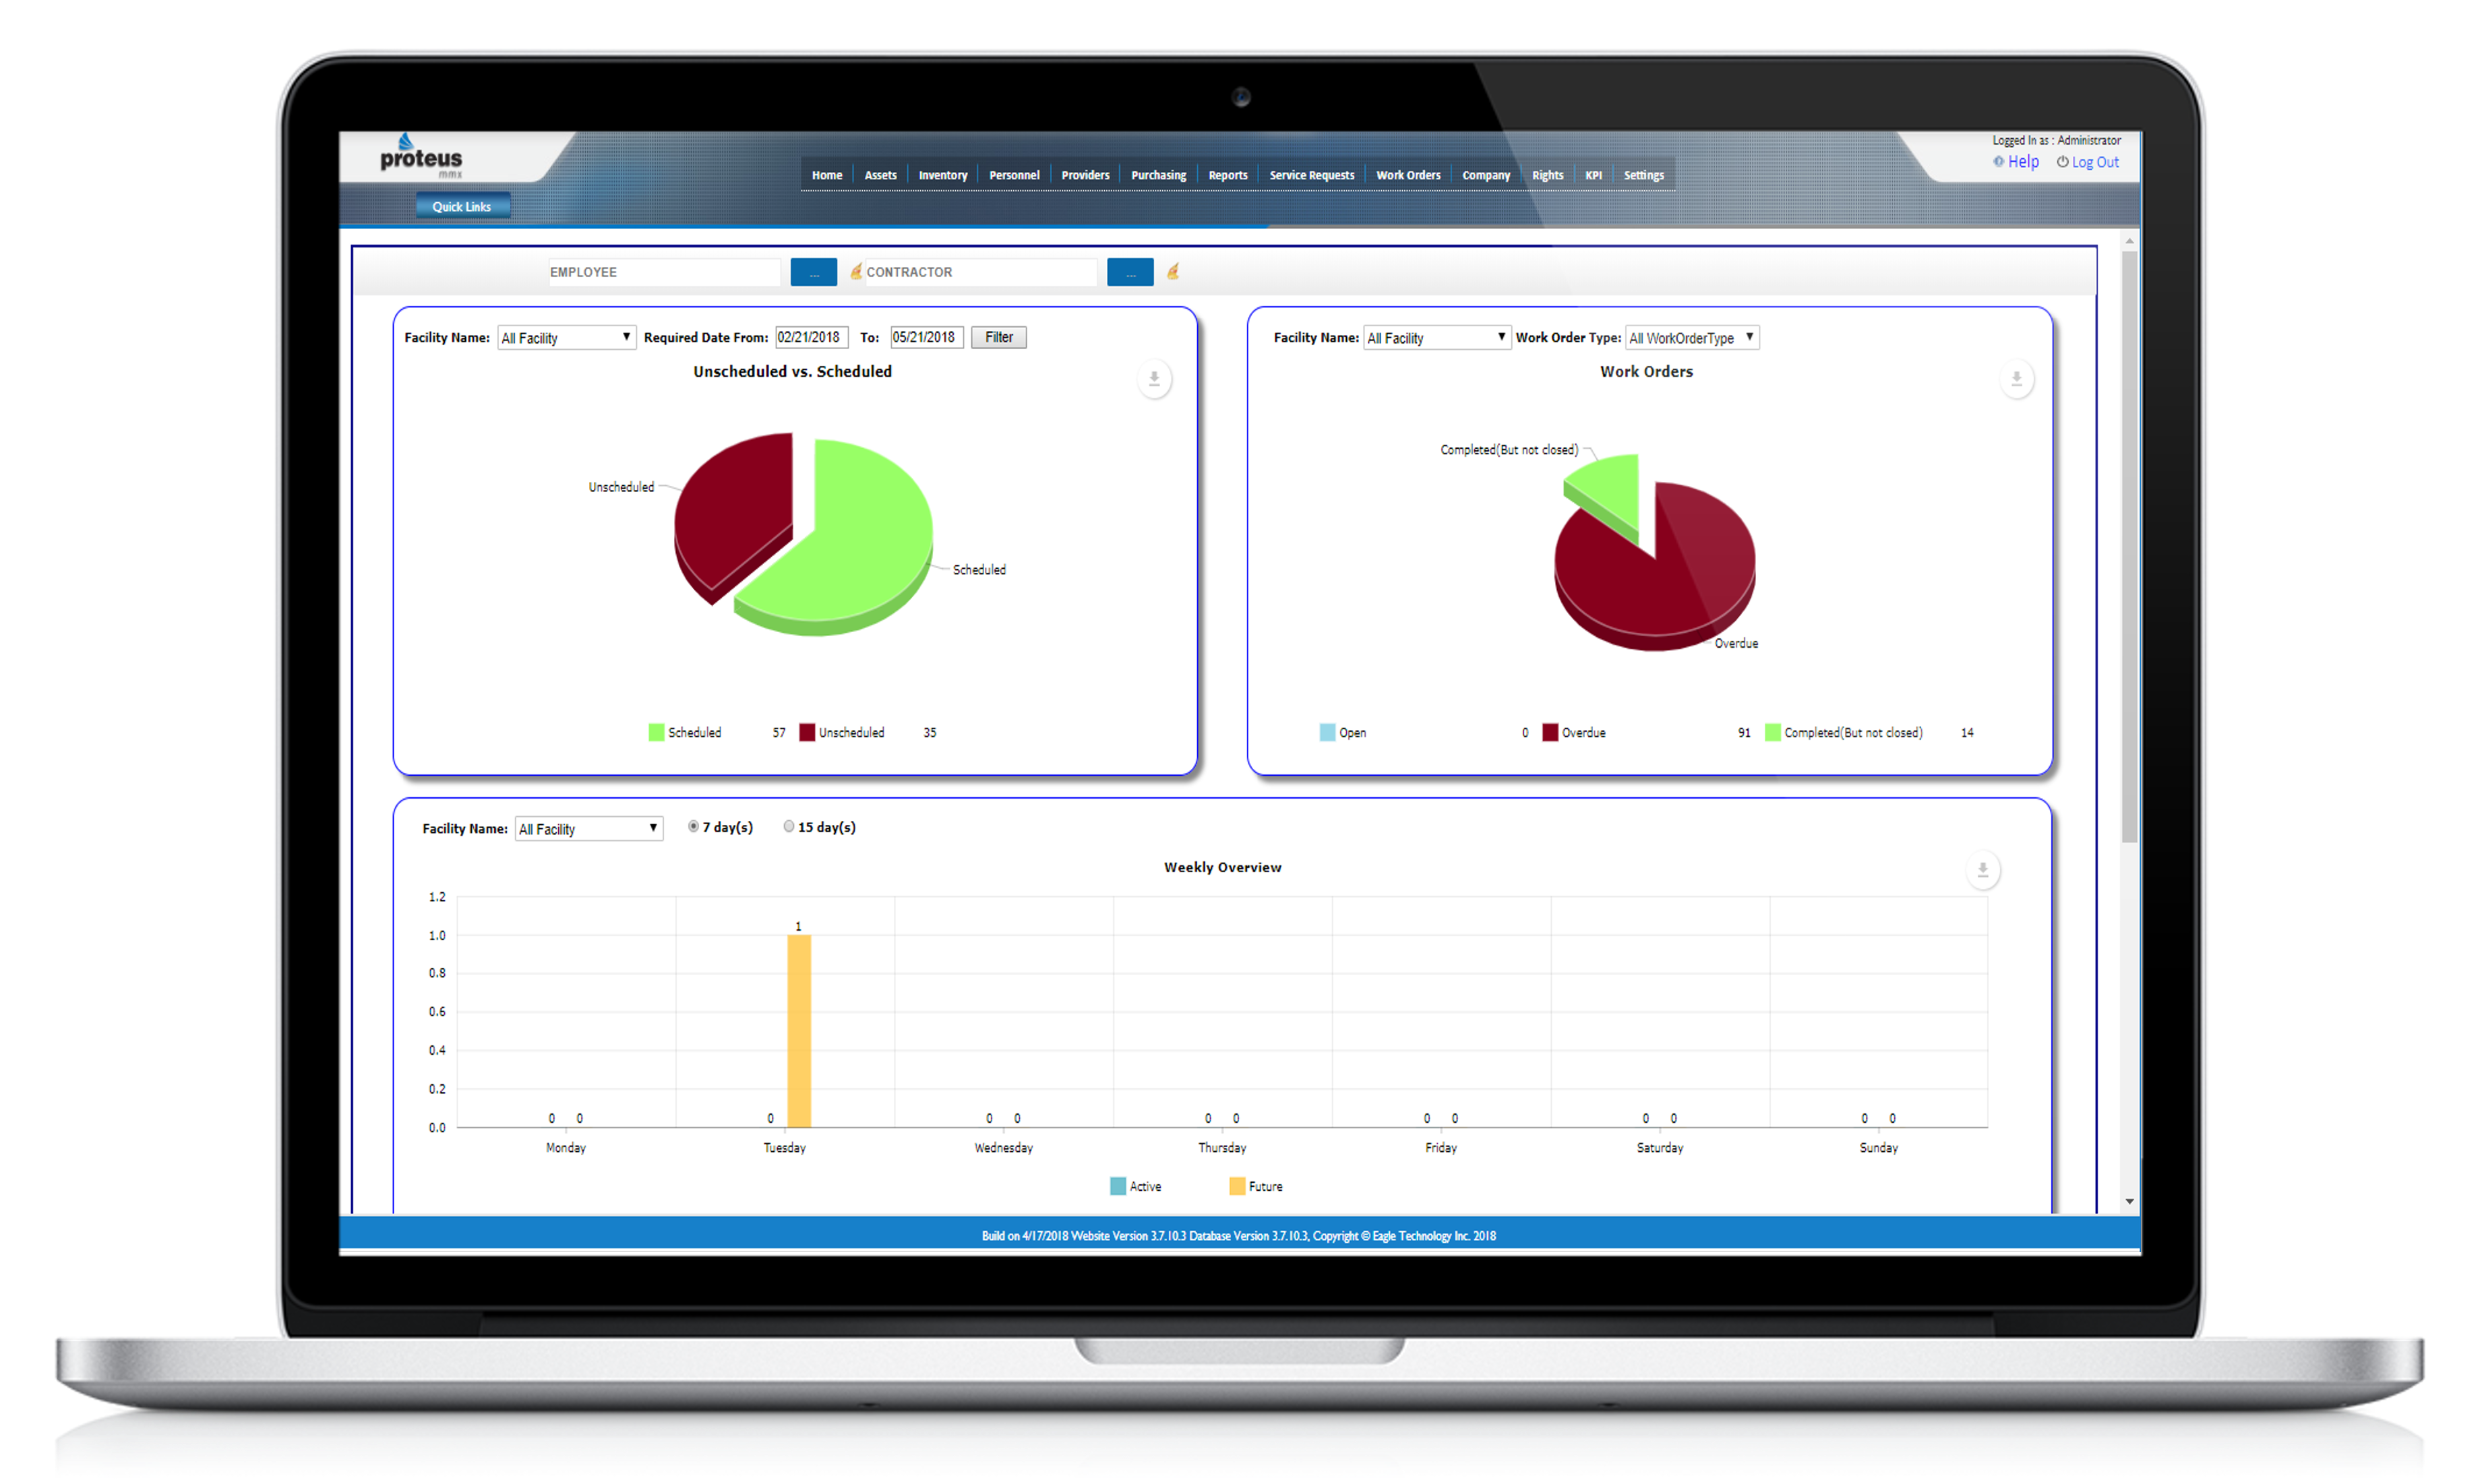 Proteus CMMS Software - You can monitor asset performance, initiate preventive/predictive maintenance measures, and easily collect data on your assets. This allows for better risk management, warranties, and change notices. When integrated with the factory floor and MES/ERP syst